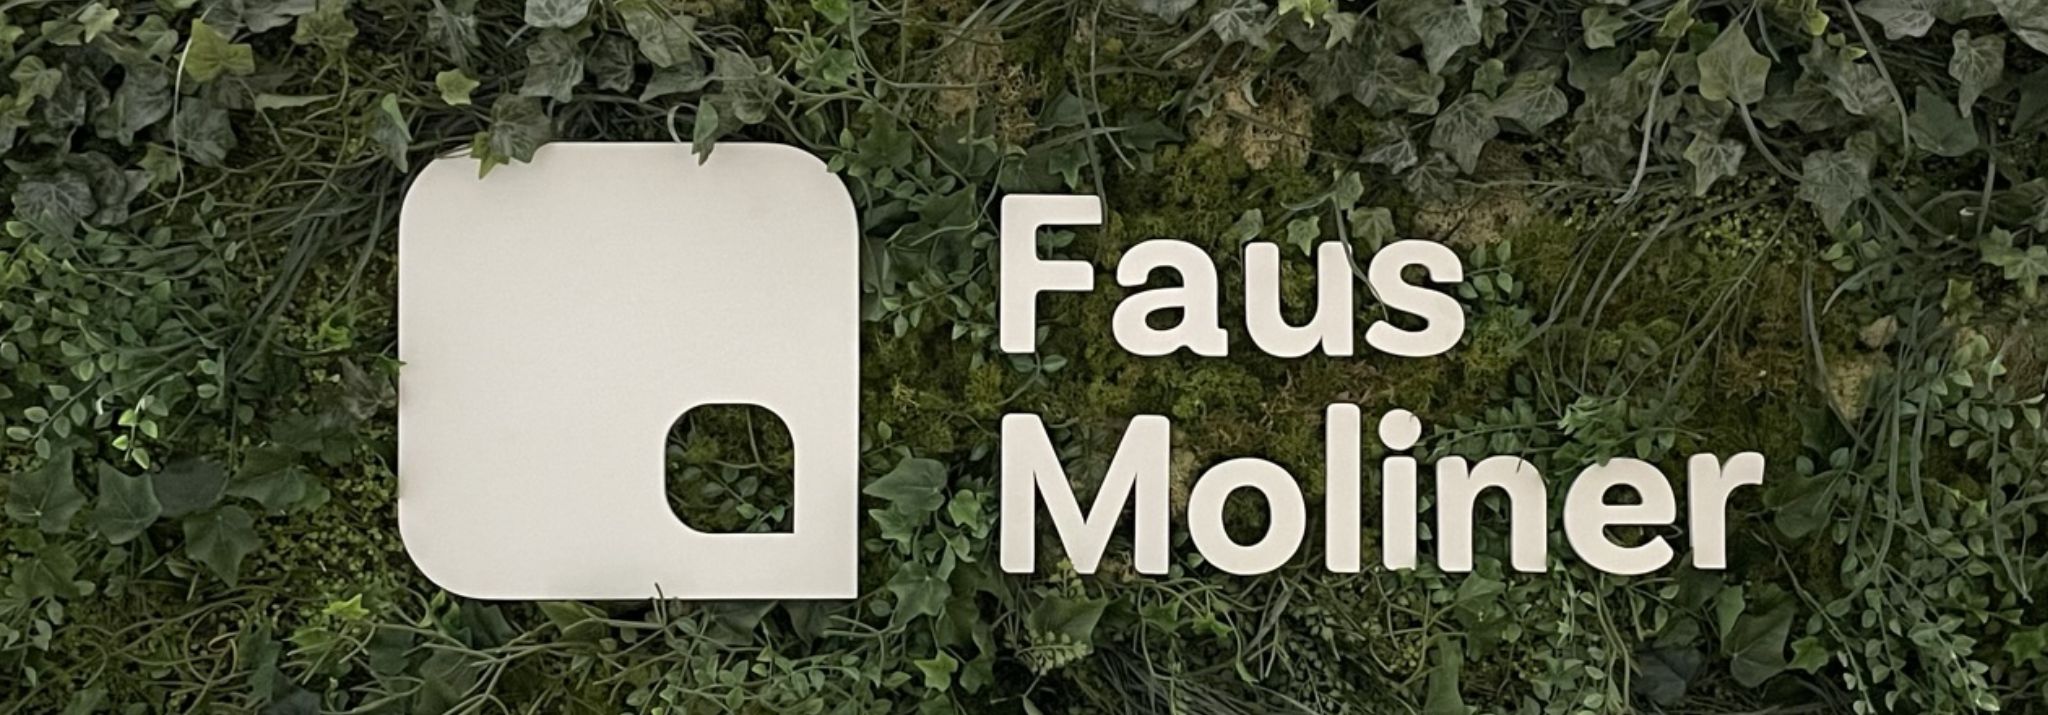 Discover the law firm Faus Moliner